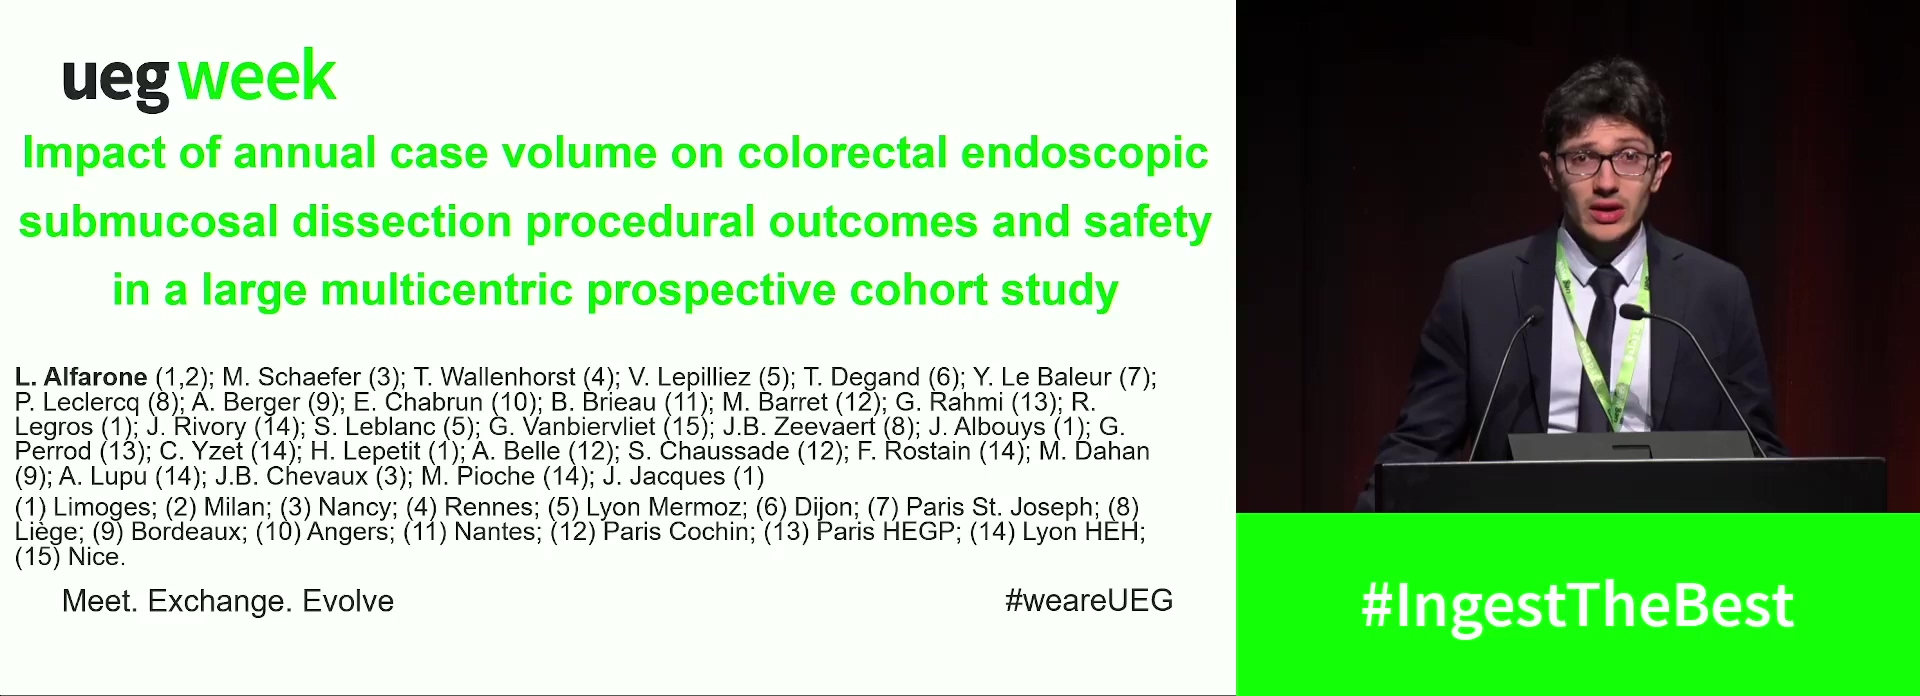 IMPACT OF ANNUAL CASE VOLUME ON COLORECTAL ENDOSCOPIC SUBMUCOSAL DISSECTION PROCEDURAL OUTCOMES AND SAFETY IN A LARGE MULTICENTRIC PROSPECTIVE COHORT STUDY